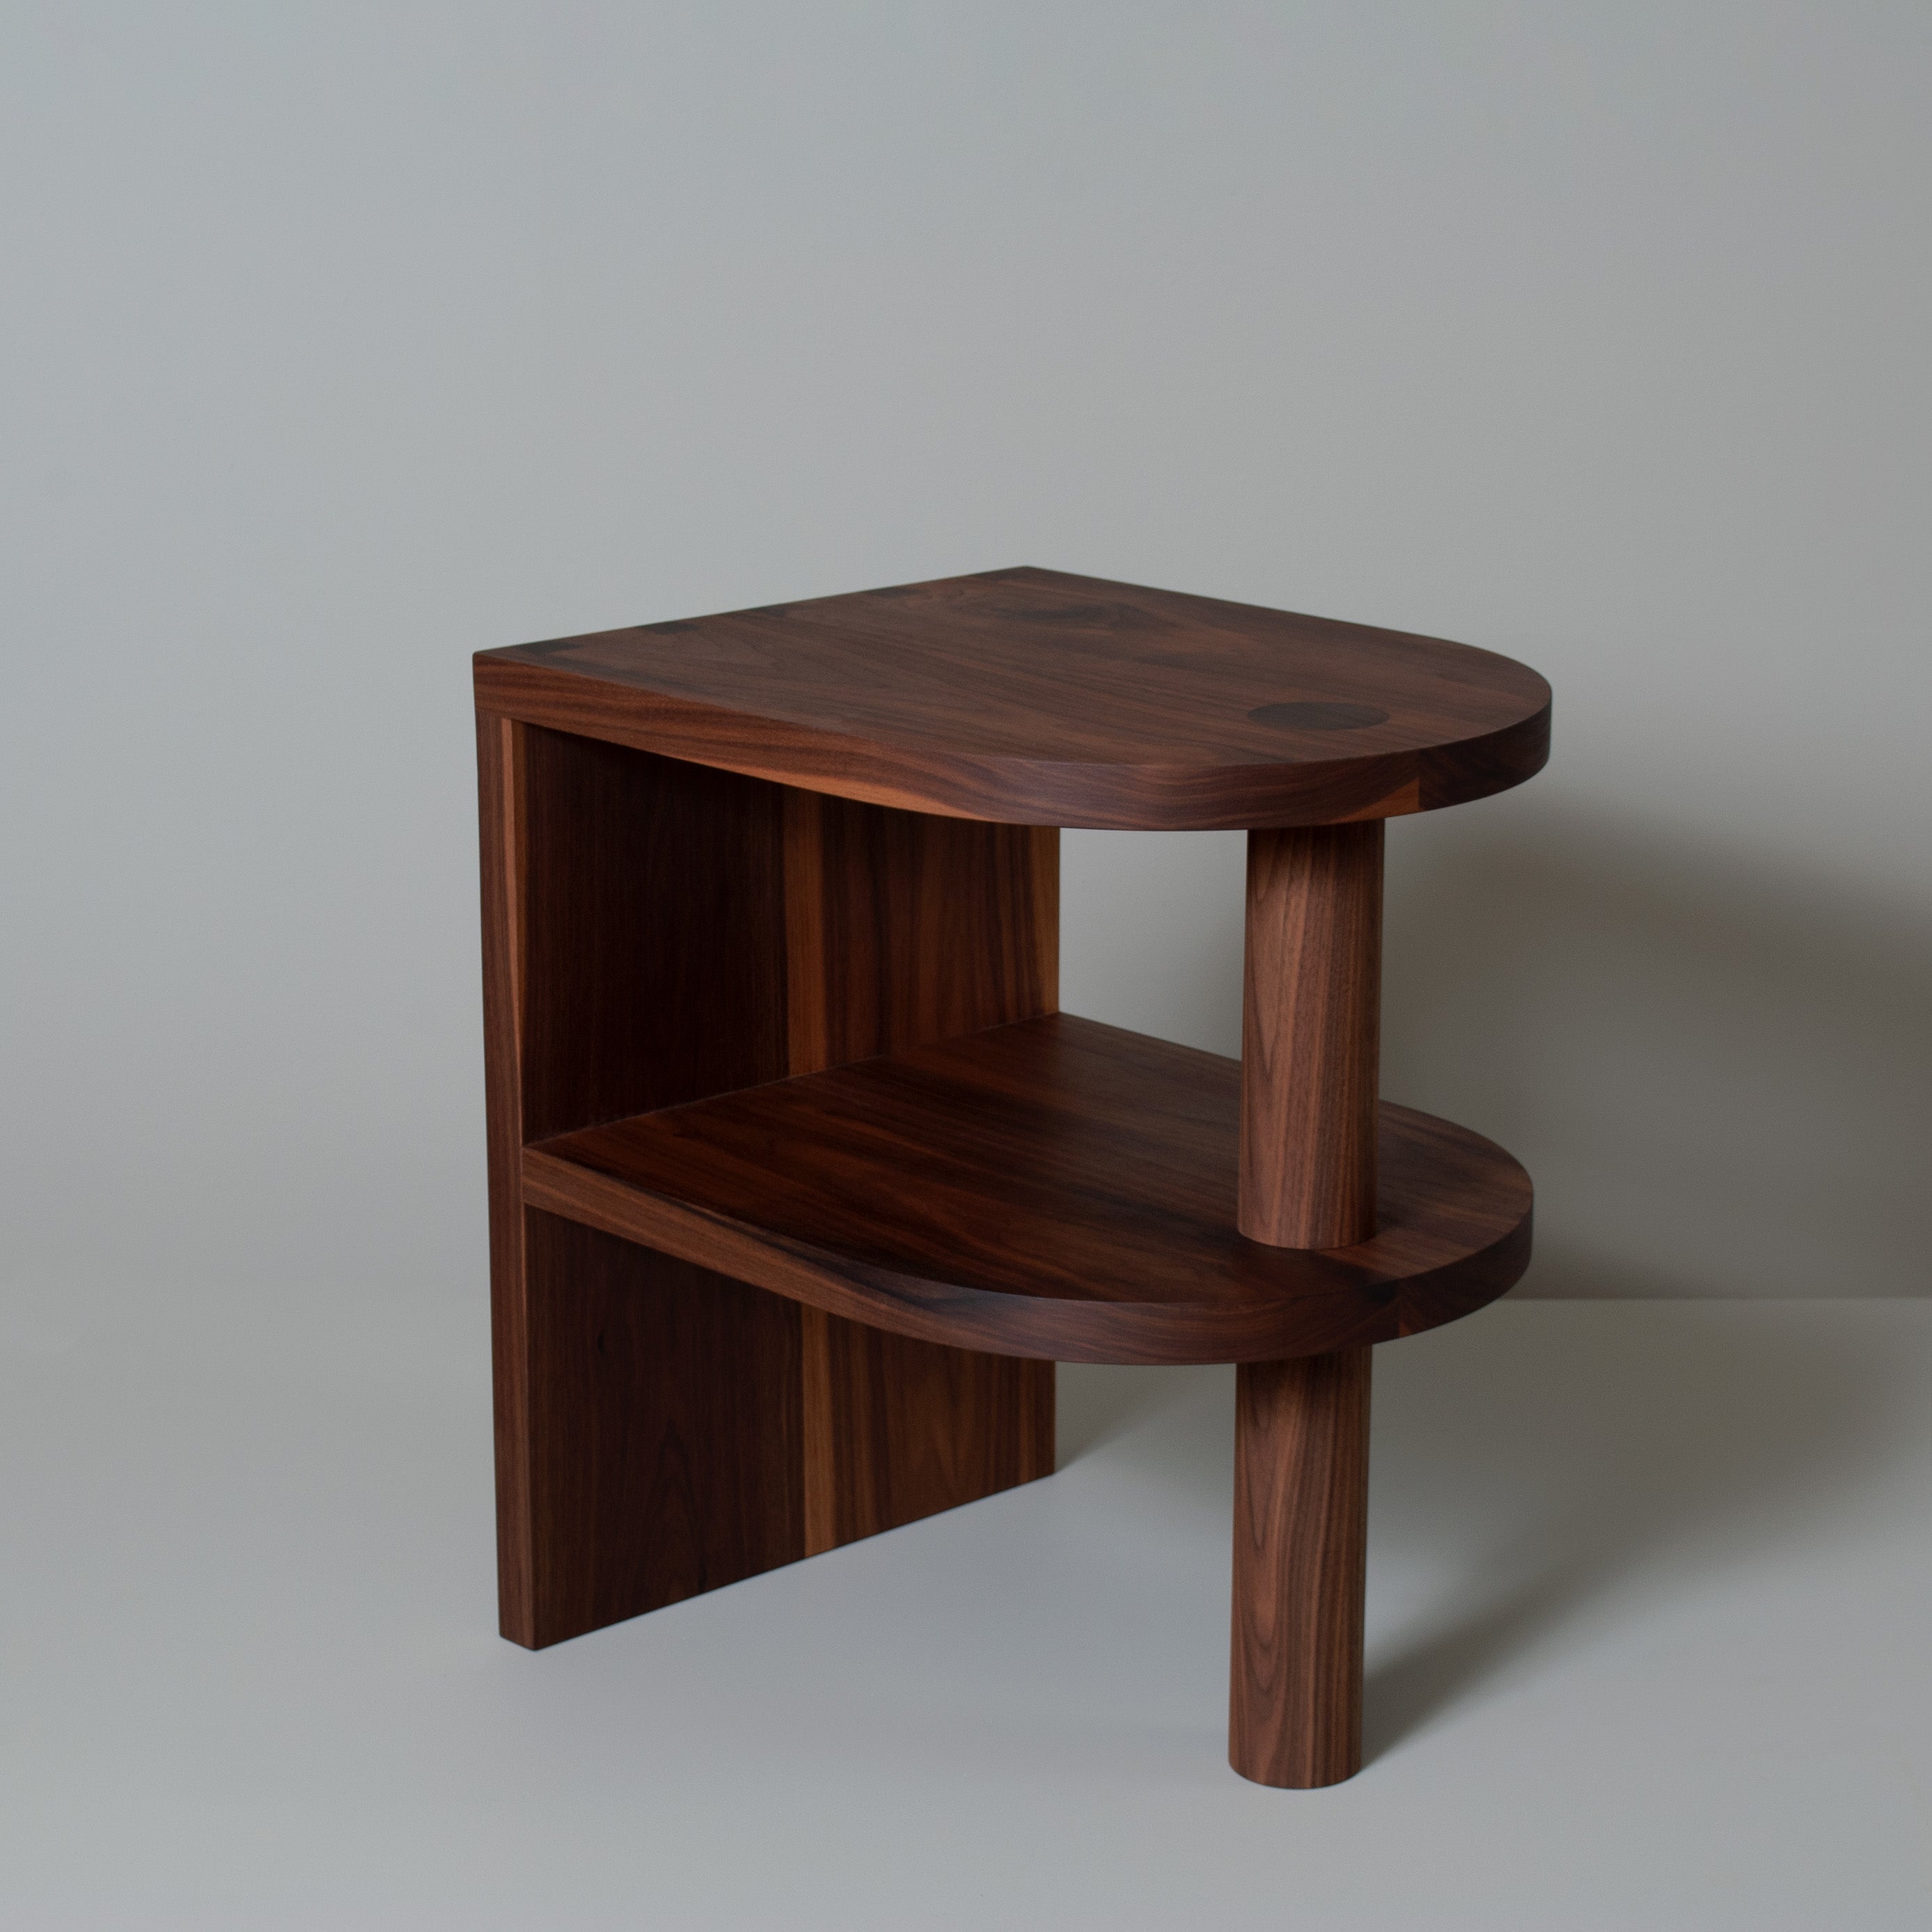 Architectural Handcrafted Pillar Walnut End Table For Sale